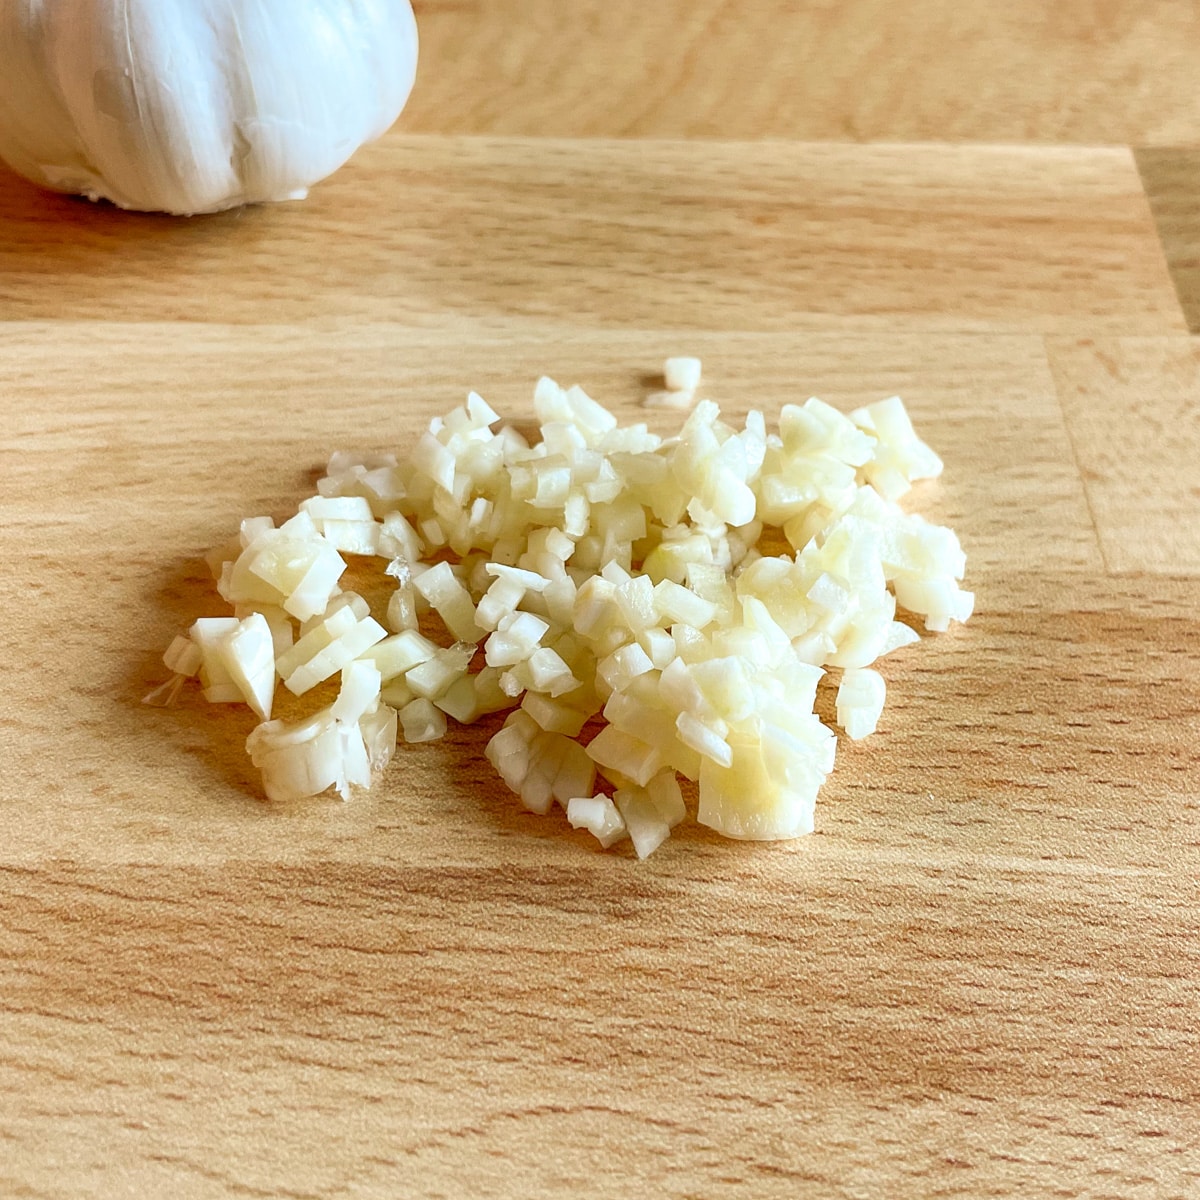 Minced garlic with a head of garlic in the background on a butcher block cutting board